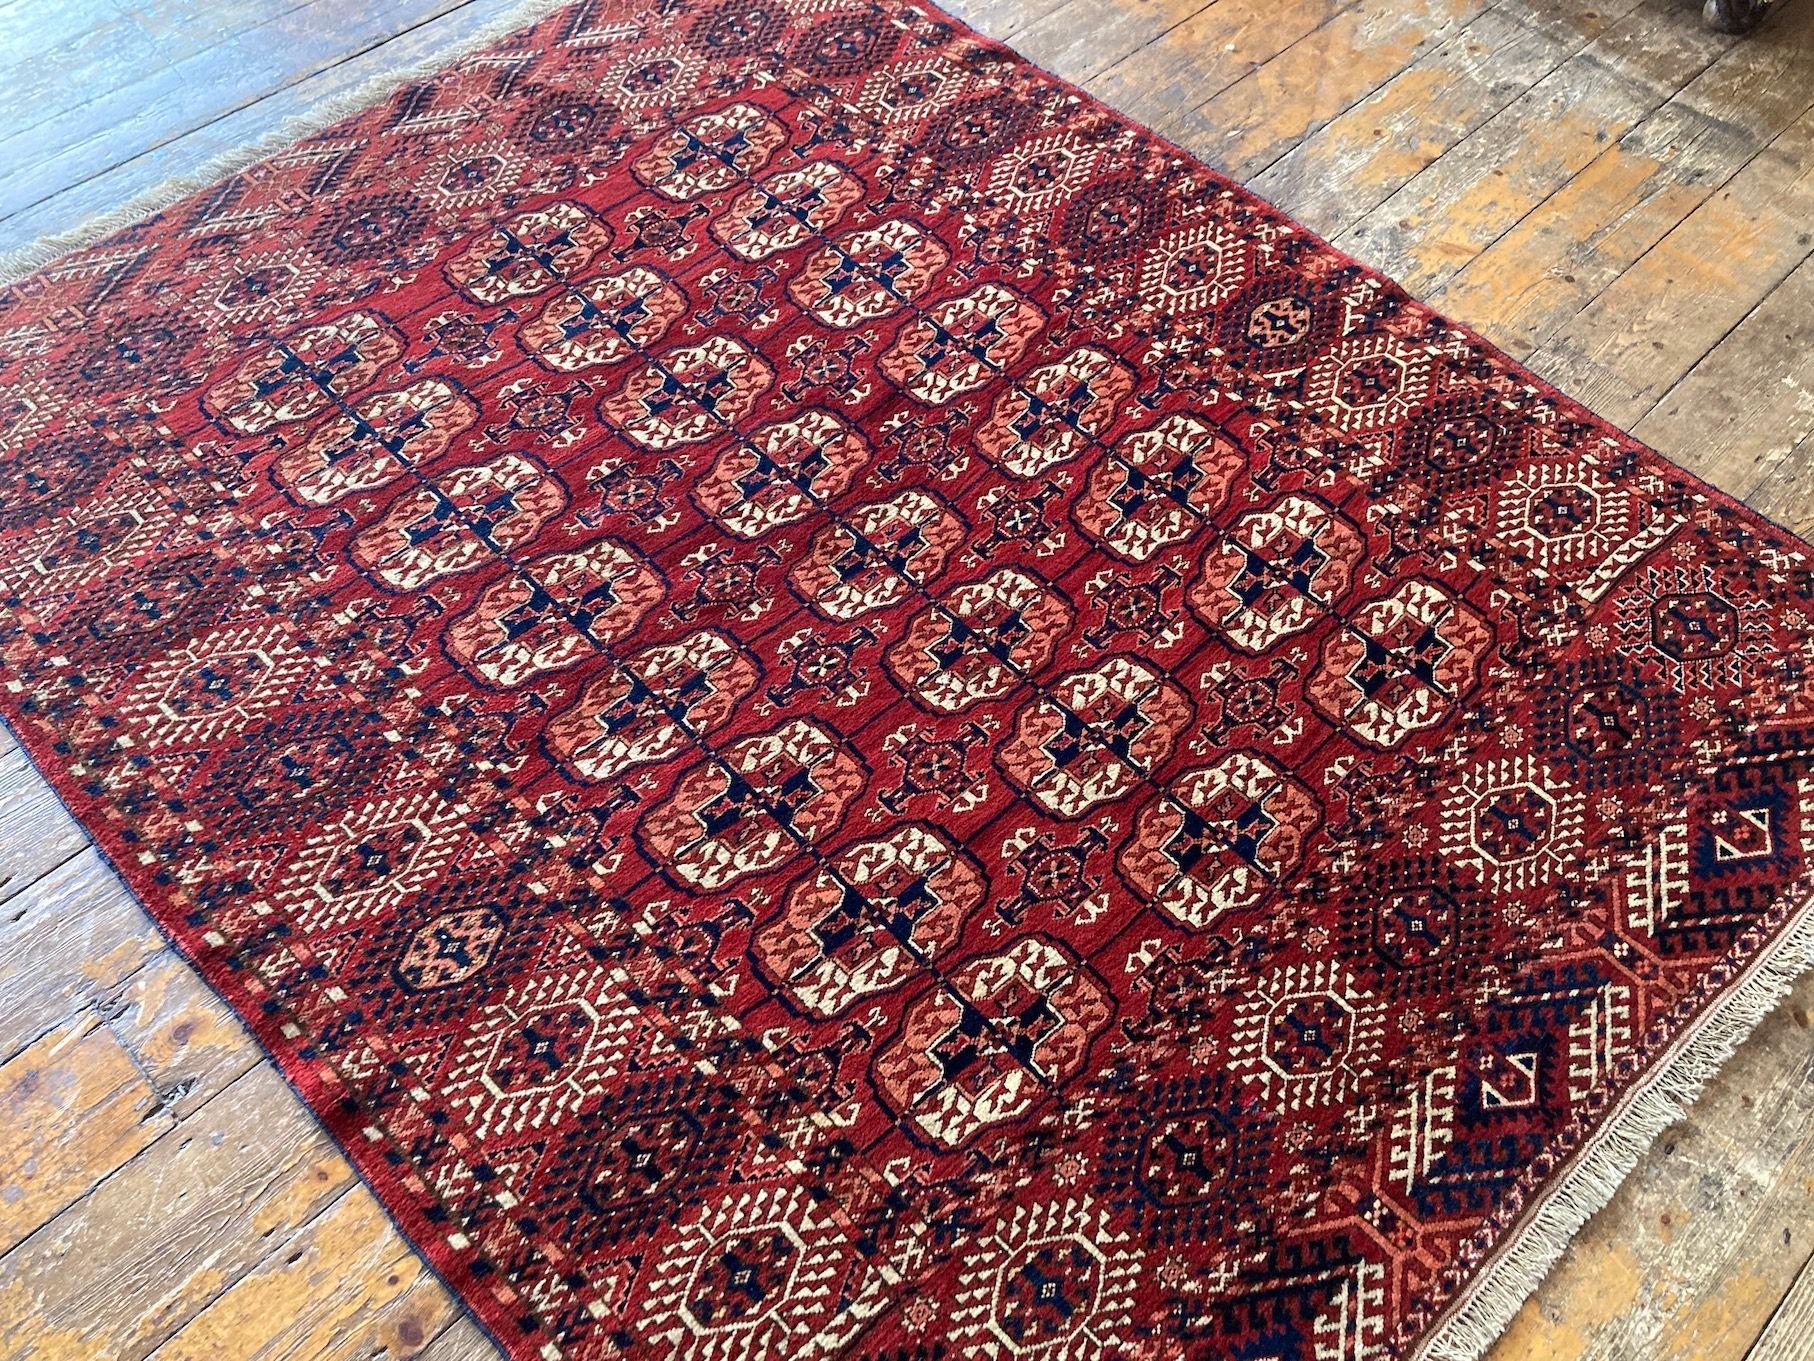 Antique Tekke Wedding Rug 1.70m x 1.37m In Good Condition For Sale In St. Albans, GB